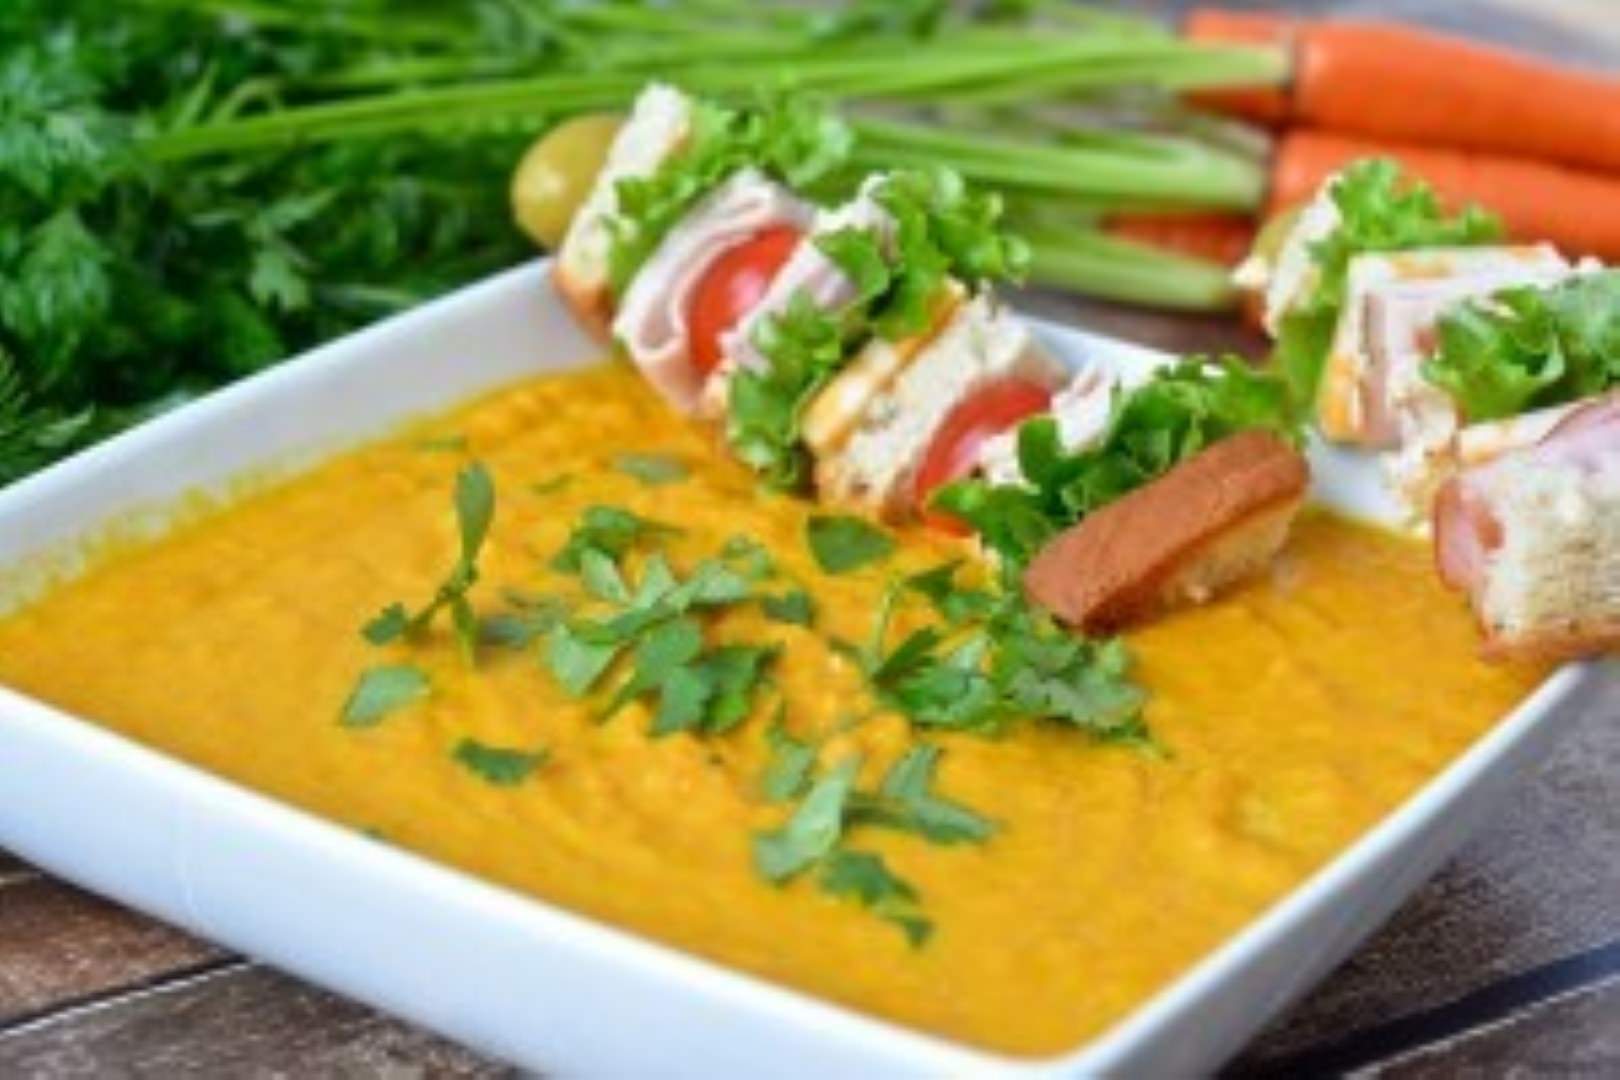 Three Bakers Curried Carrot Soup w:Club Sandwich Skewers 4